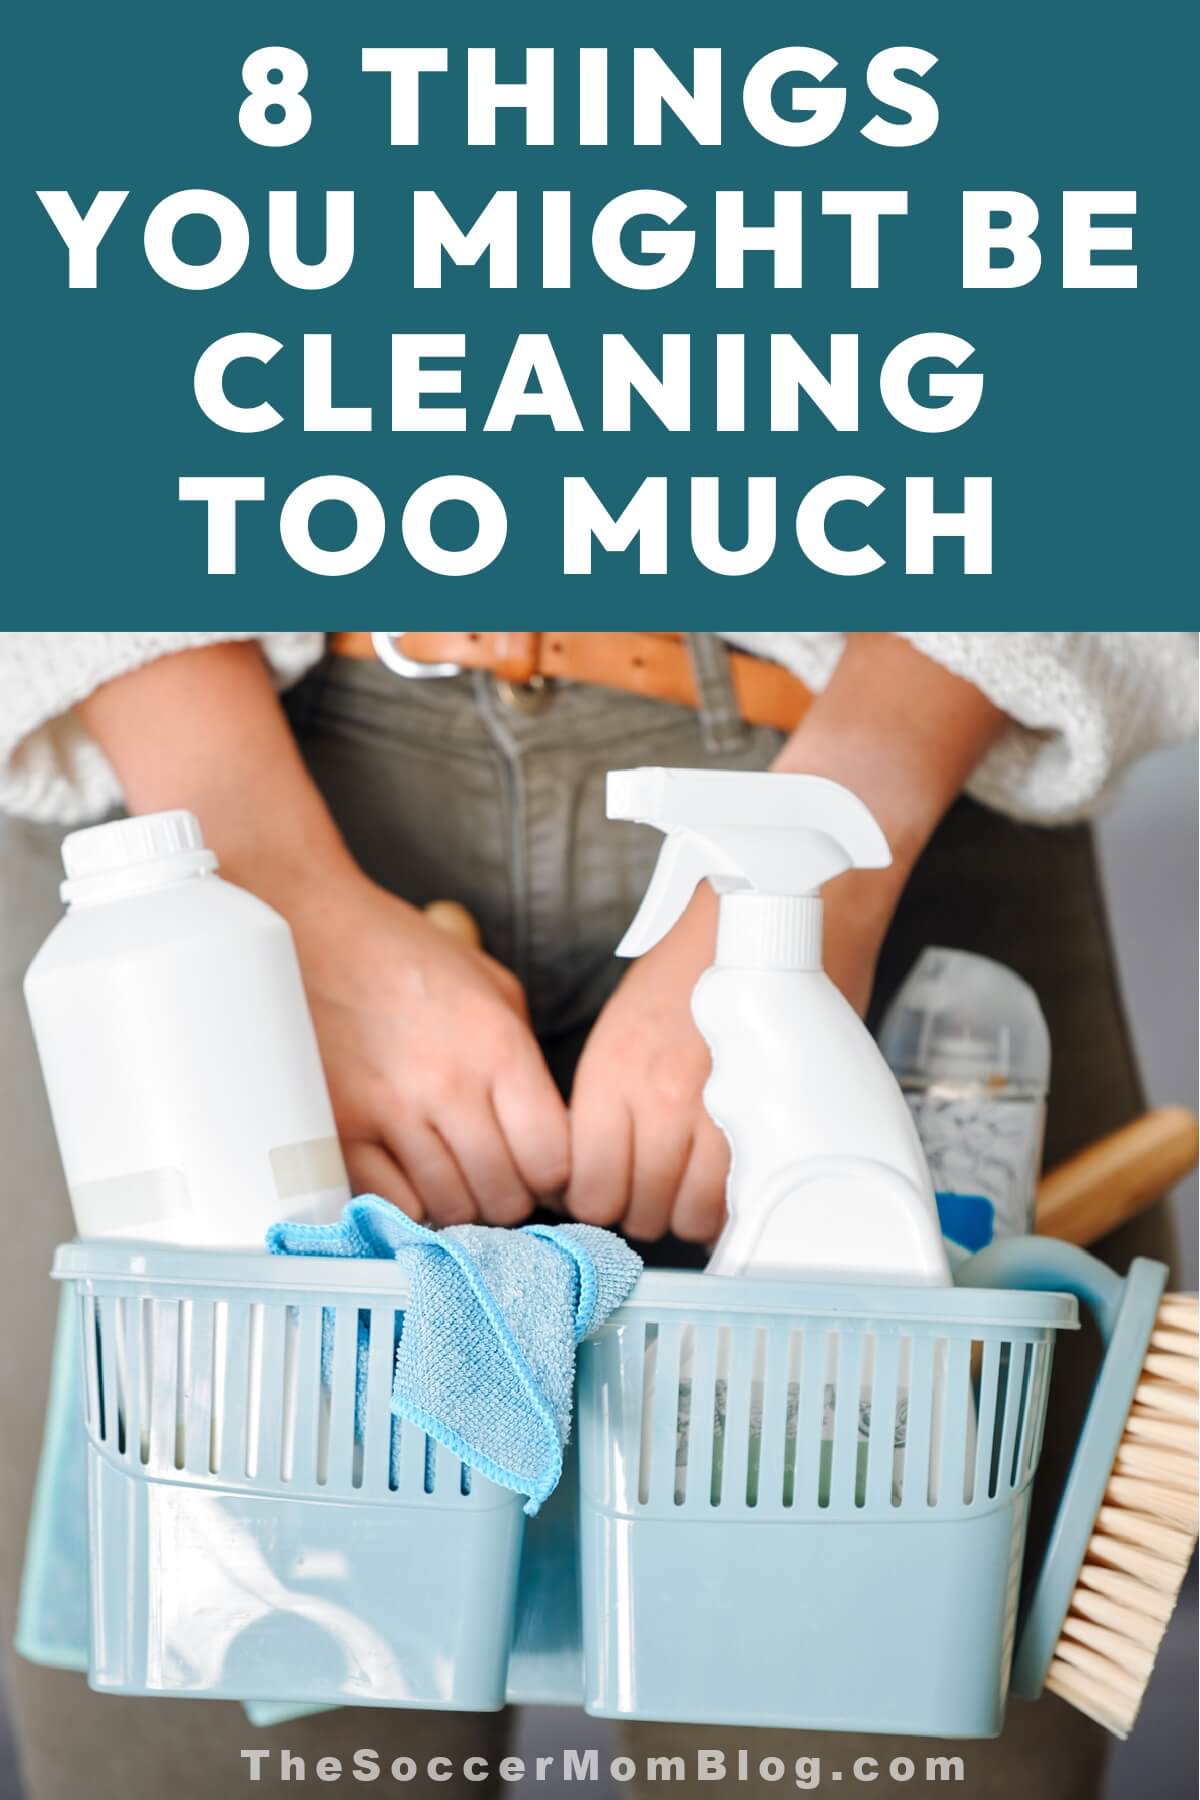 woman holding caddy of cleaning products; text overlay "8 Things You Might Be Cleaning Too Much"